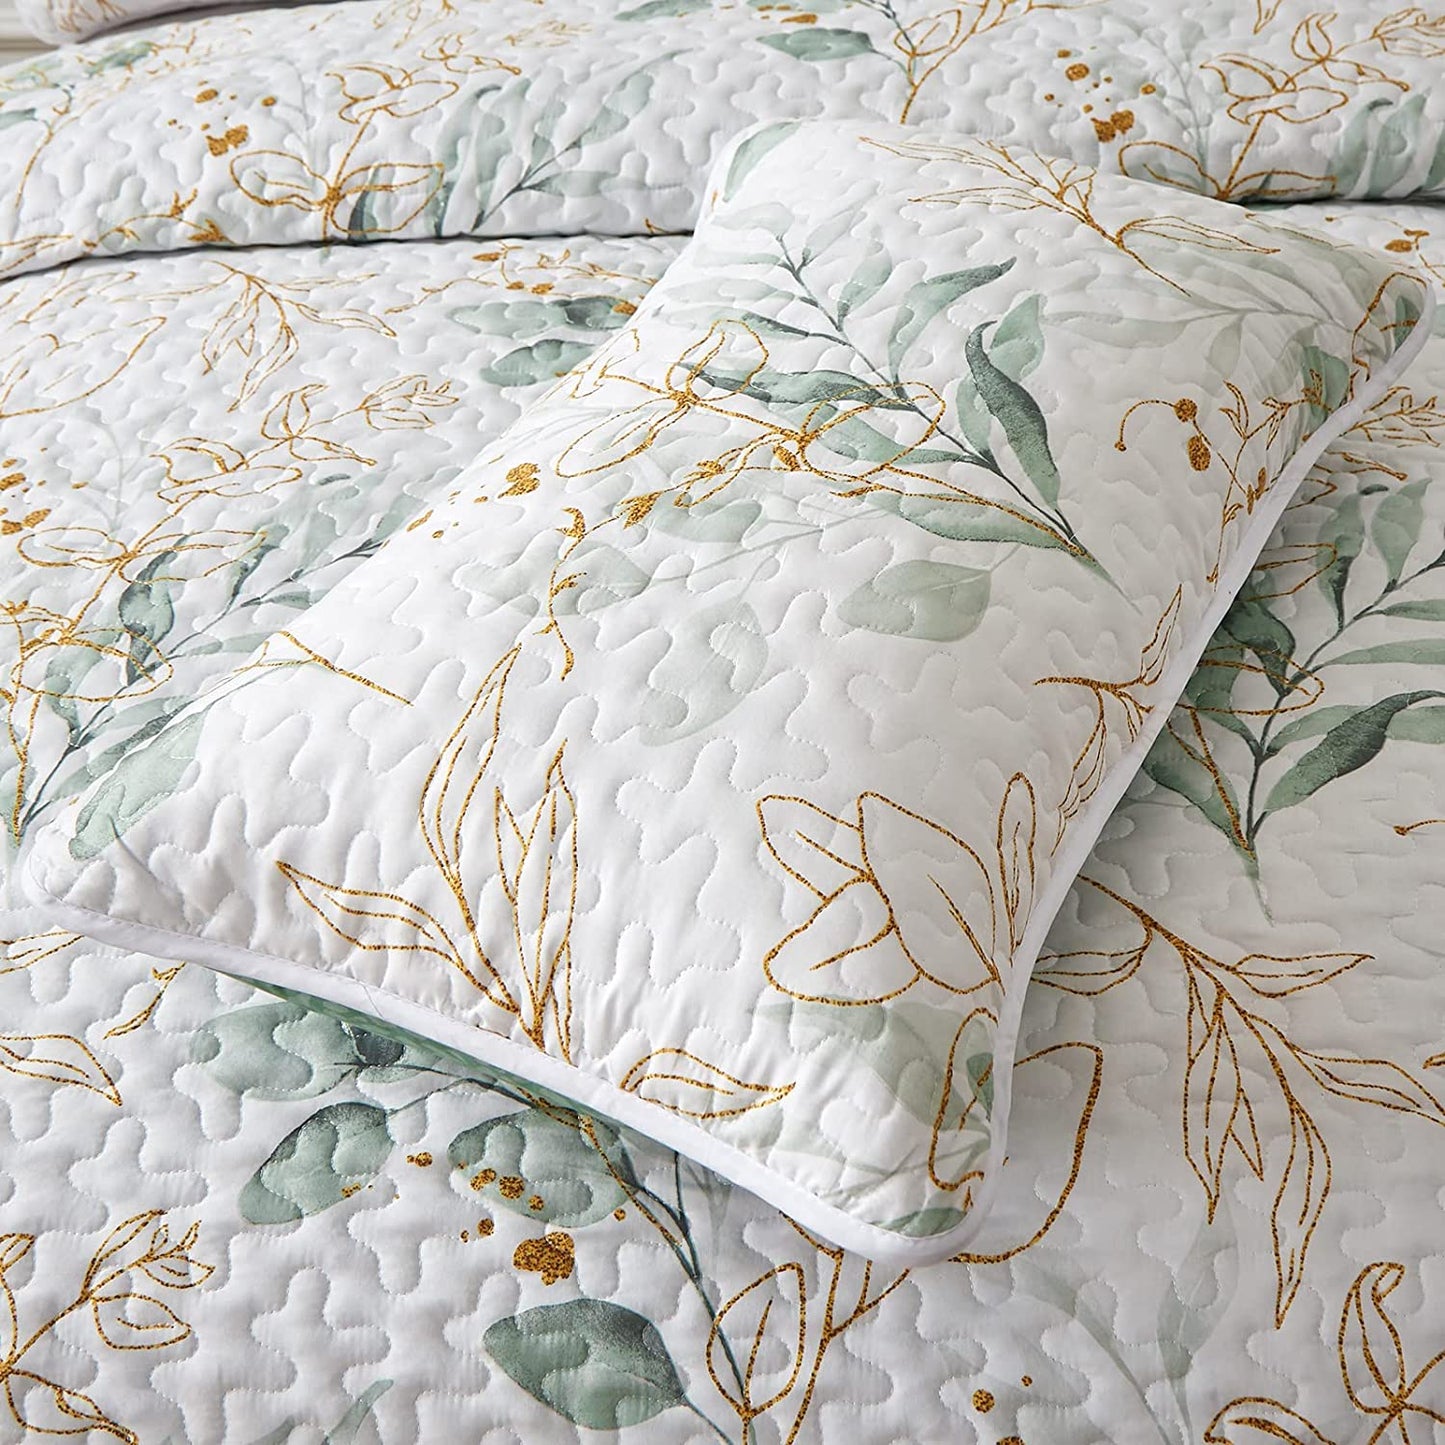 Floral Quilt King Size, Green Botanical King Quilt 3 Pieces, Reversible Soft King Quilt Bedding Set for All-Season